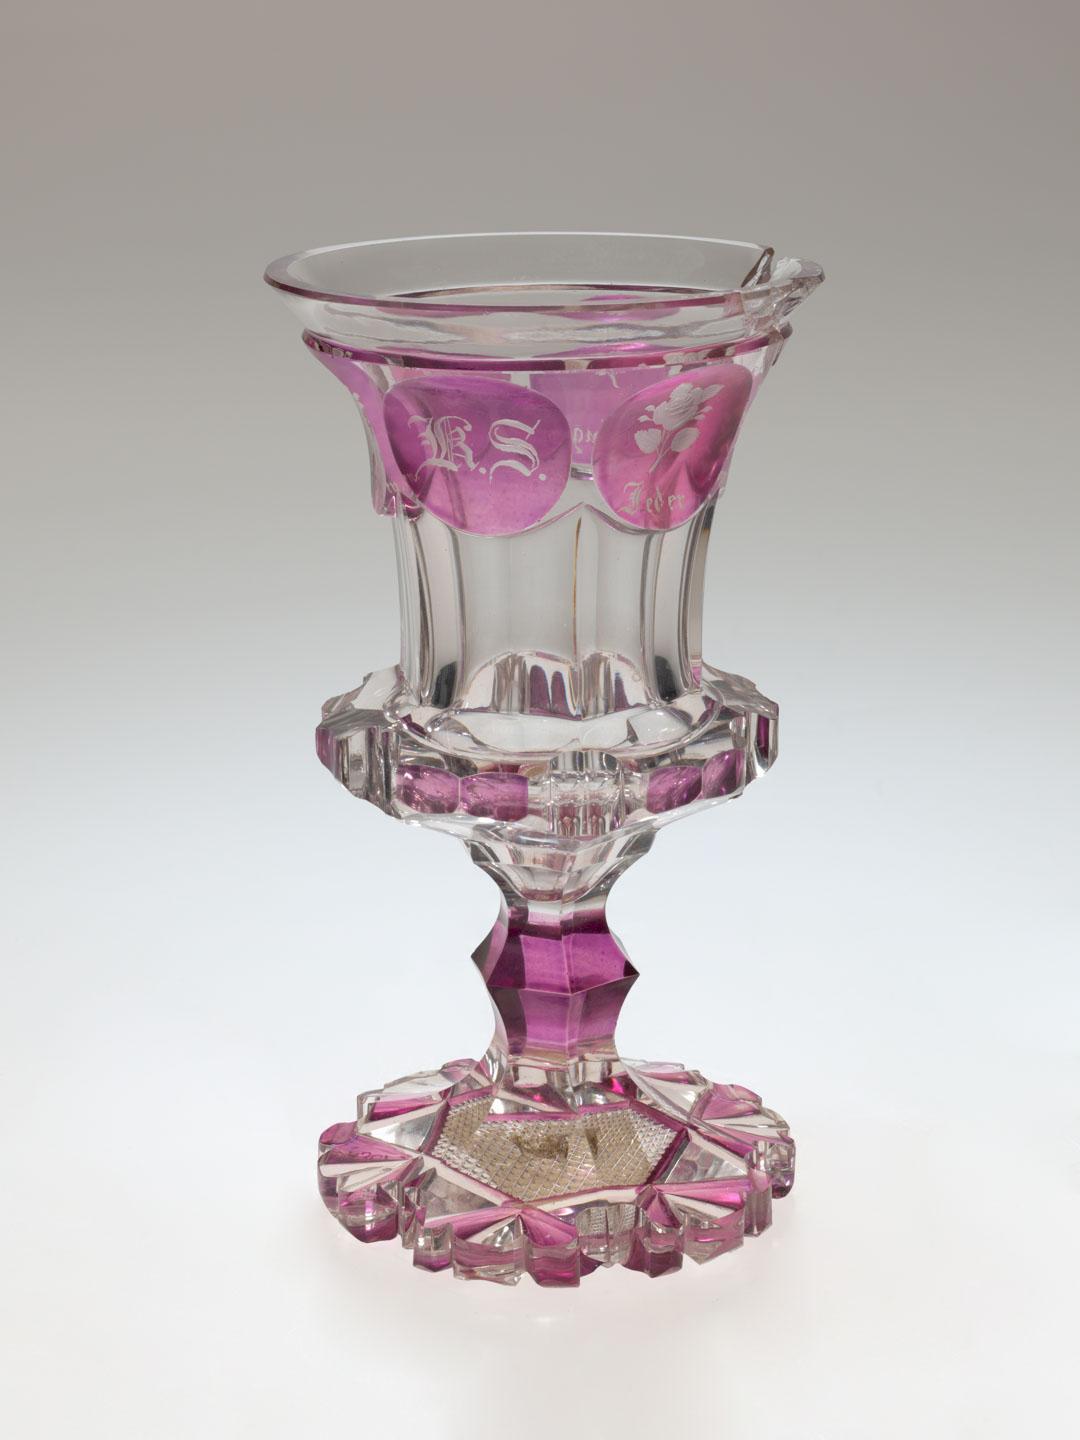 Artwork Beaker this artwork made of Clear glass painted mauve and engraved with floral motifs